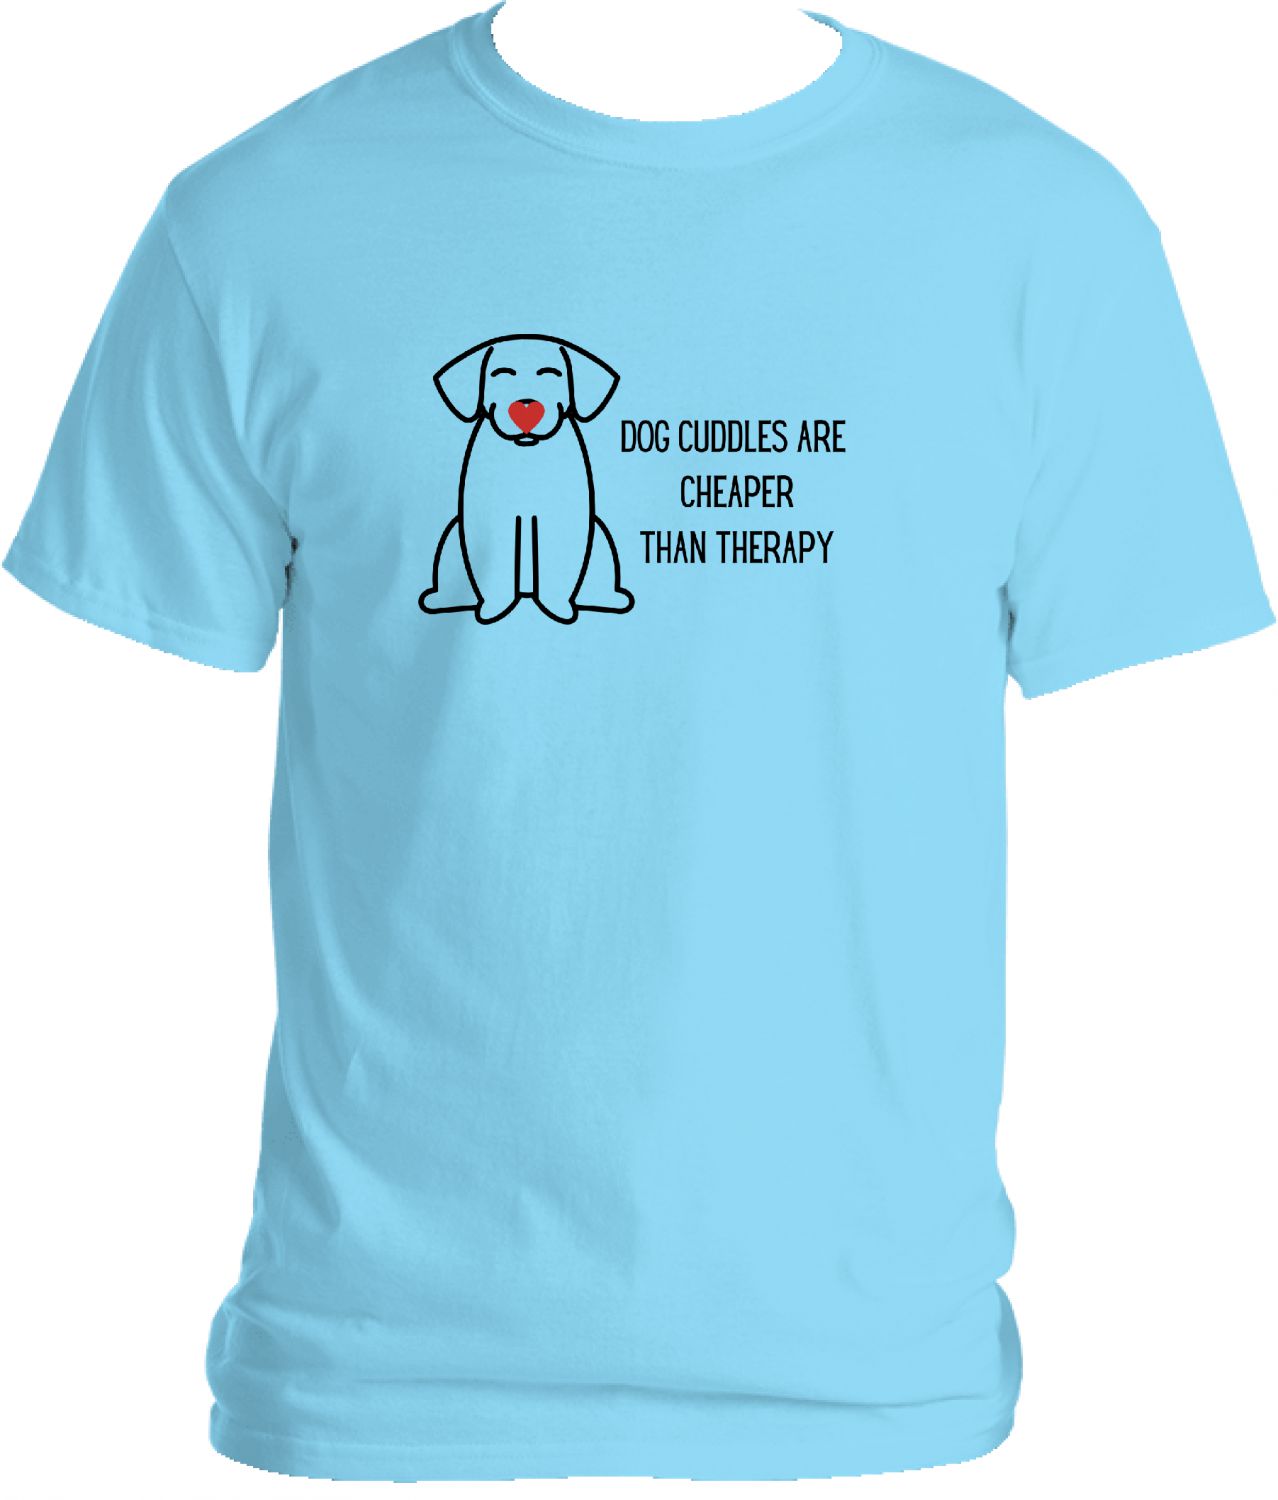 Sky T Shirt Cheaper Than Therapy